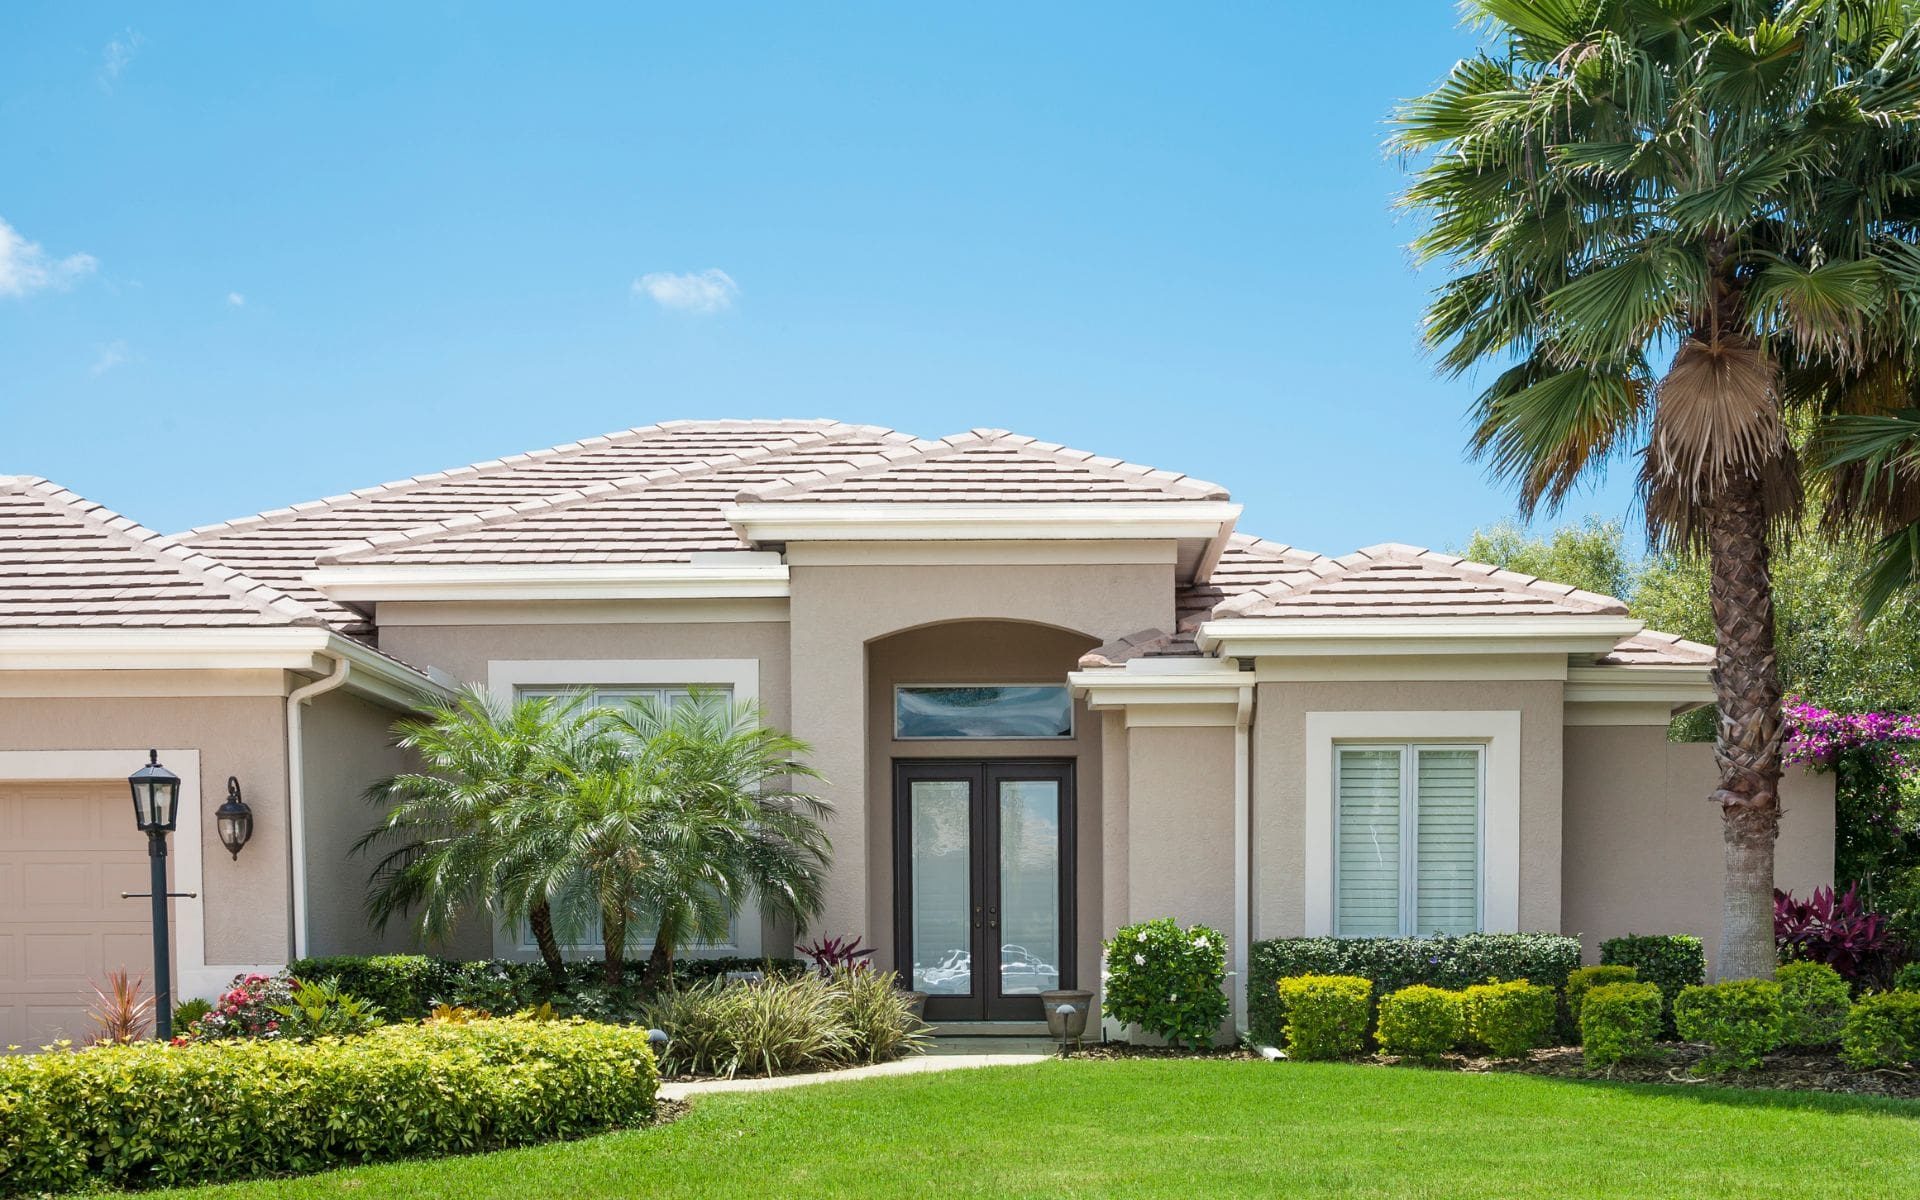 A home in South Florida with green lawn, palm trees, and shrubs.